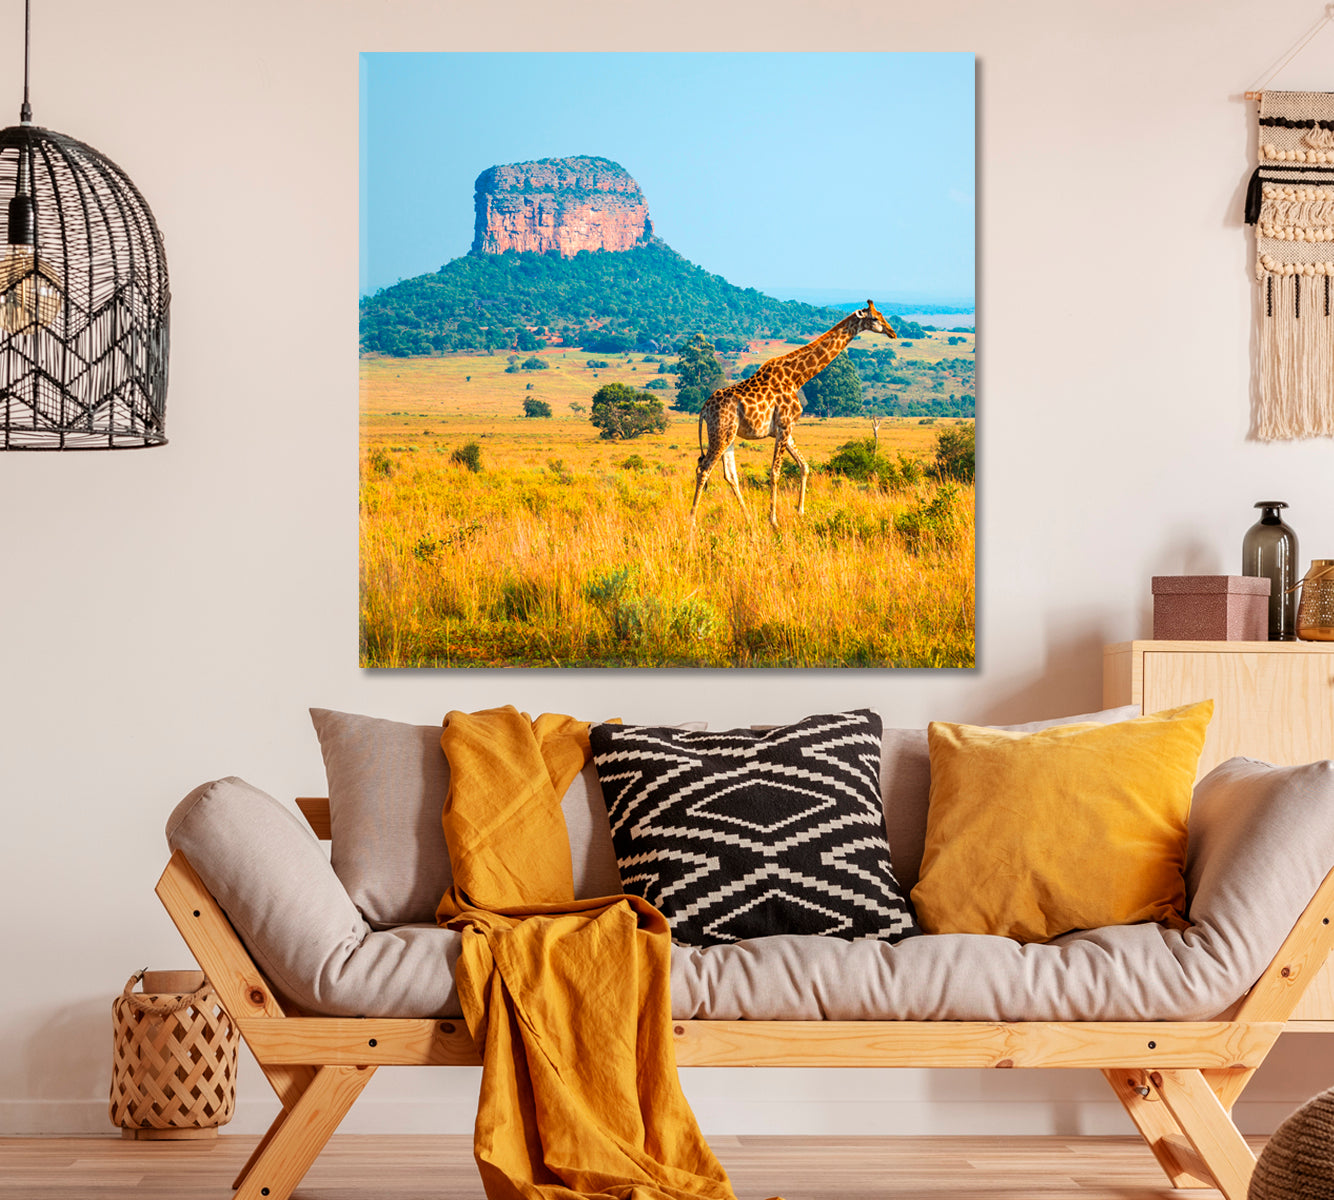 Giraffe in African Savanna Limpopo Province South Africa Canvas Print ArtLexy 1 Panel 12"x12" inches 